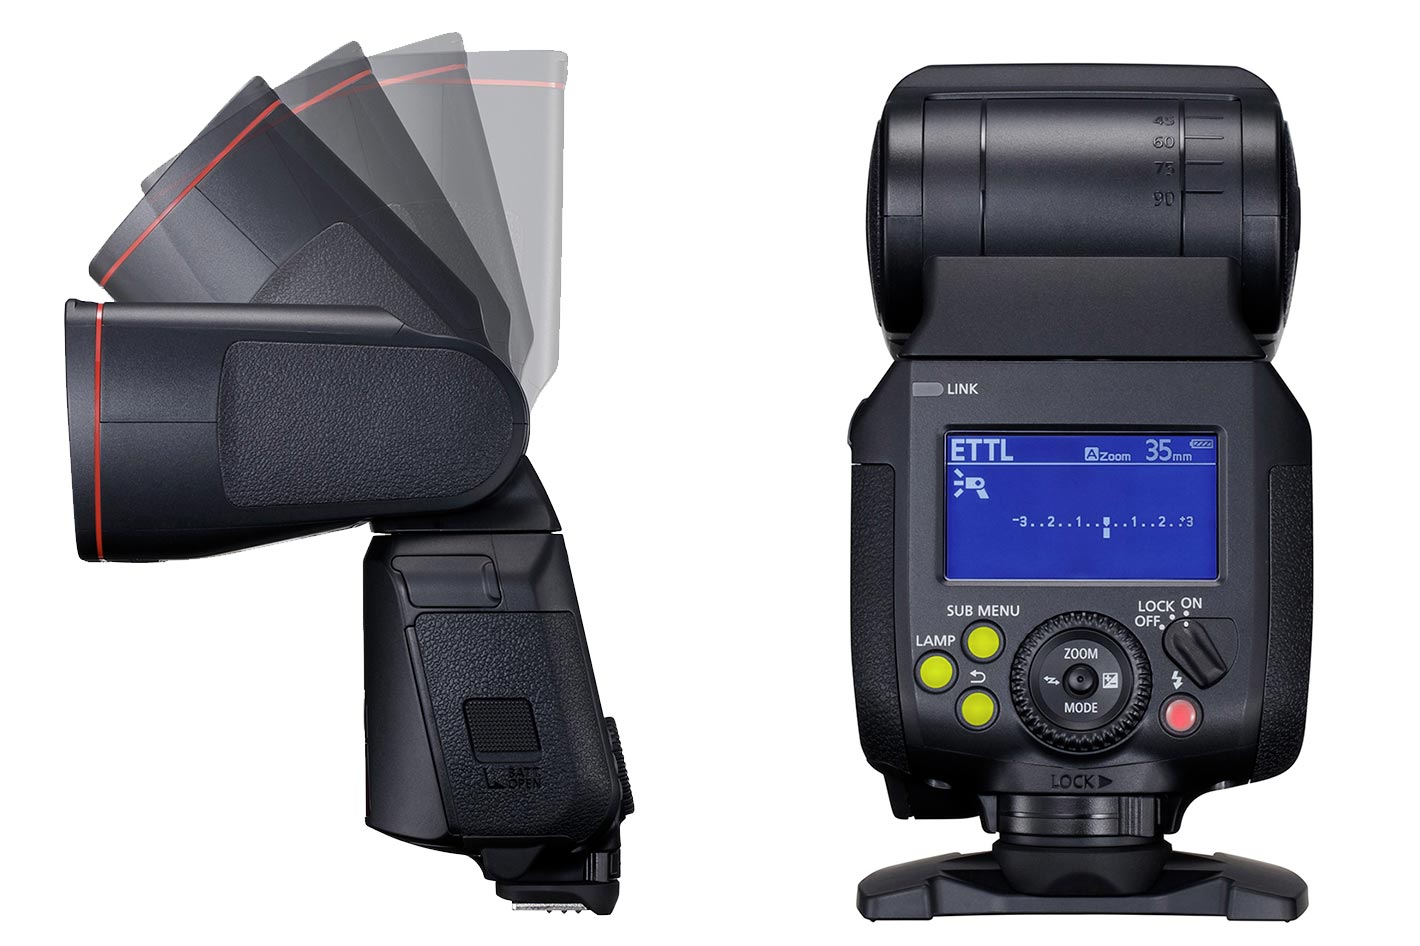 Canon Speedlite EL-1: the first “red ring” flash by Jose Antunes